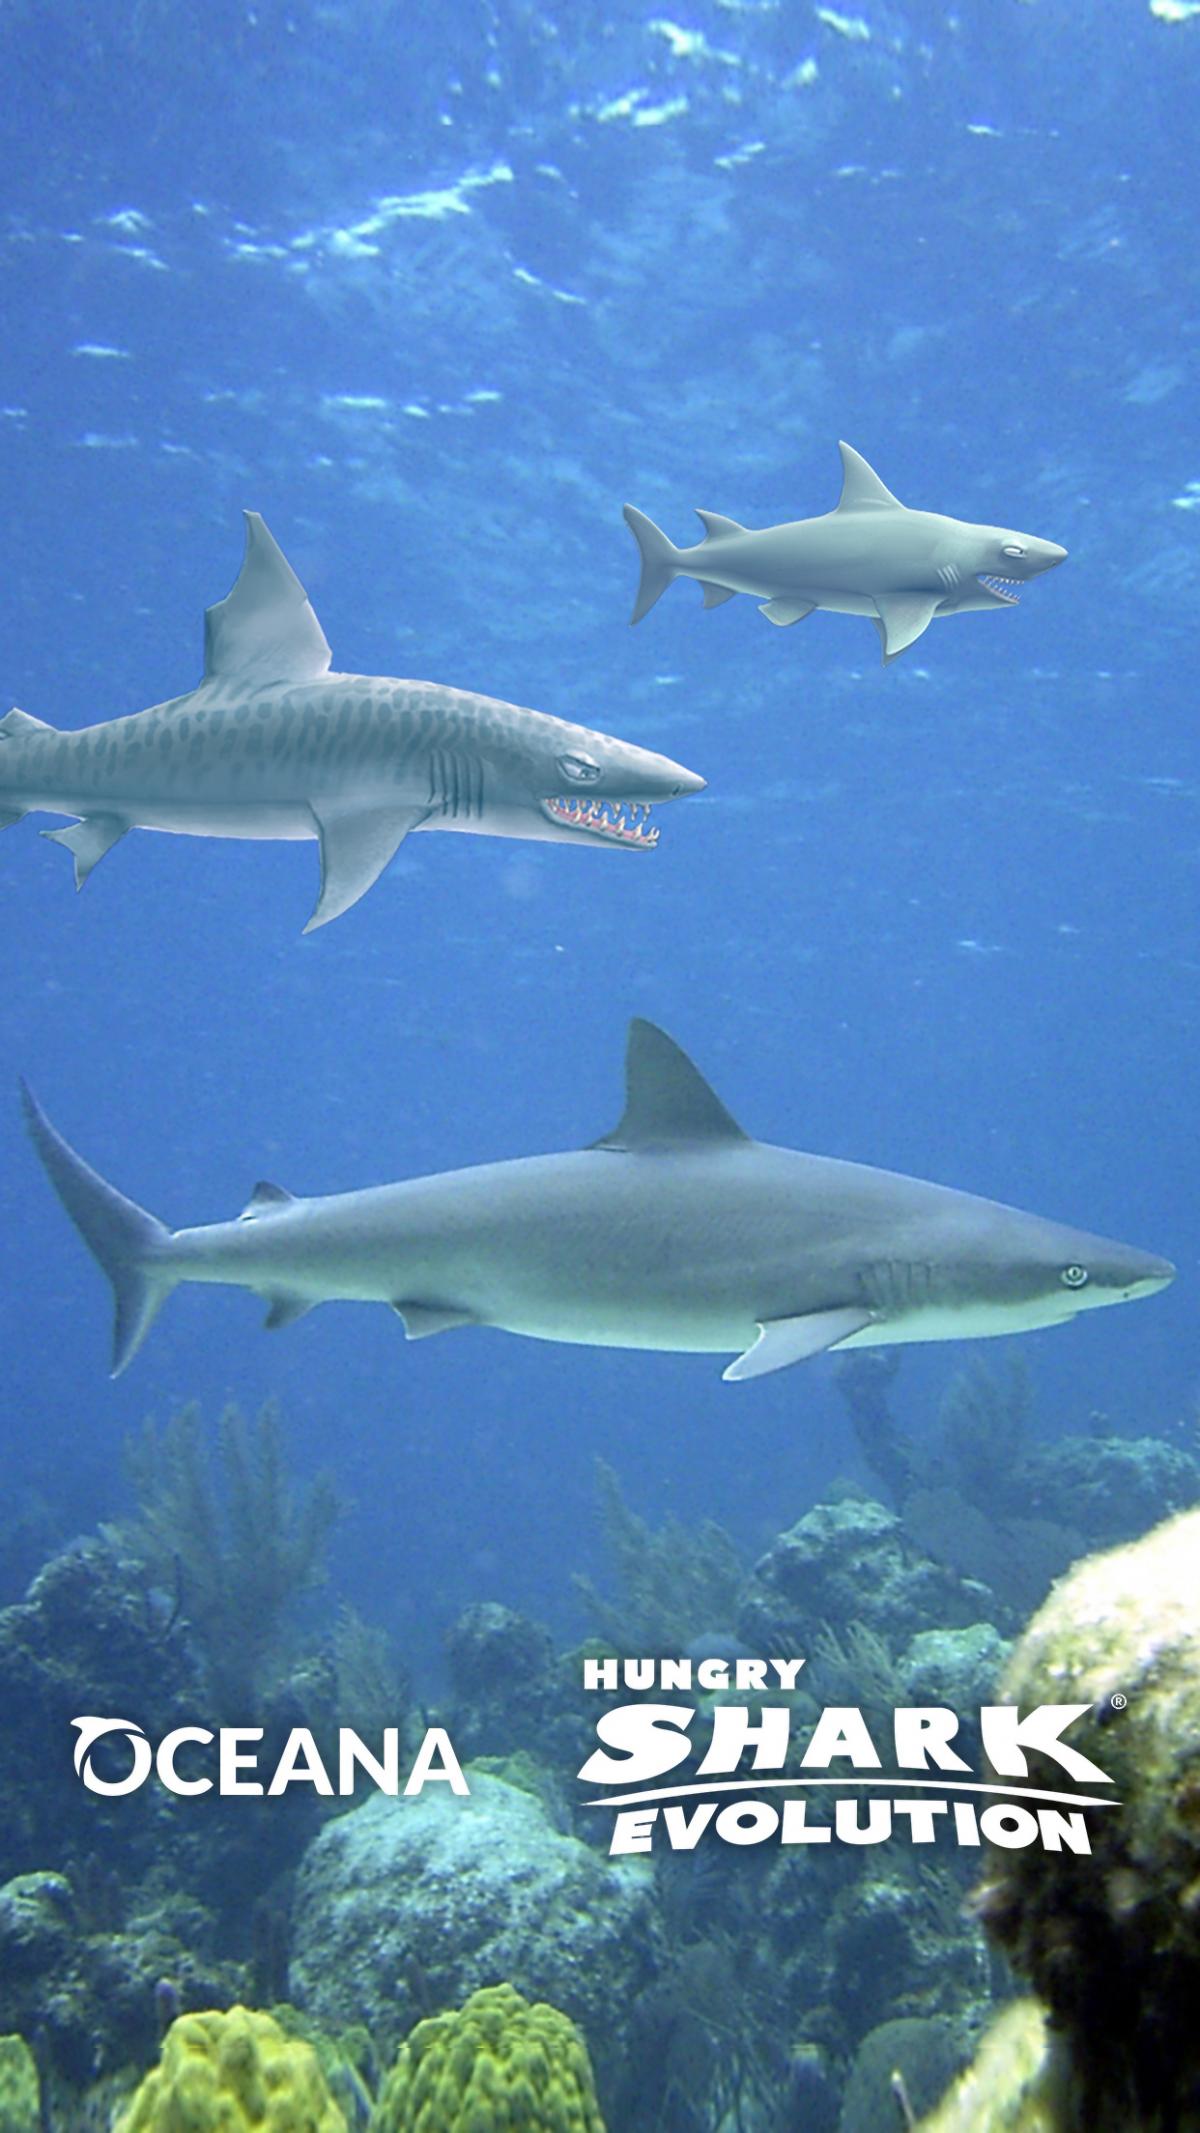 Download this mobile wallpaper from Hungry Shark Evolution and Oceana.